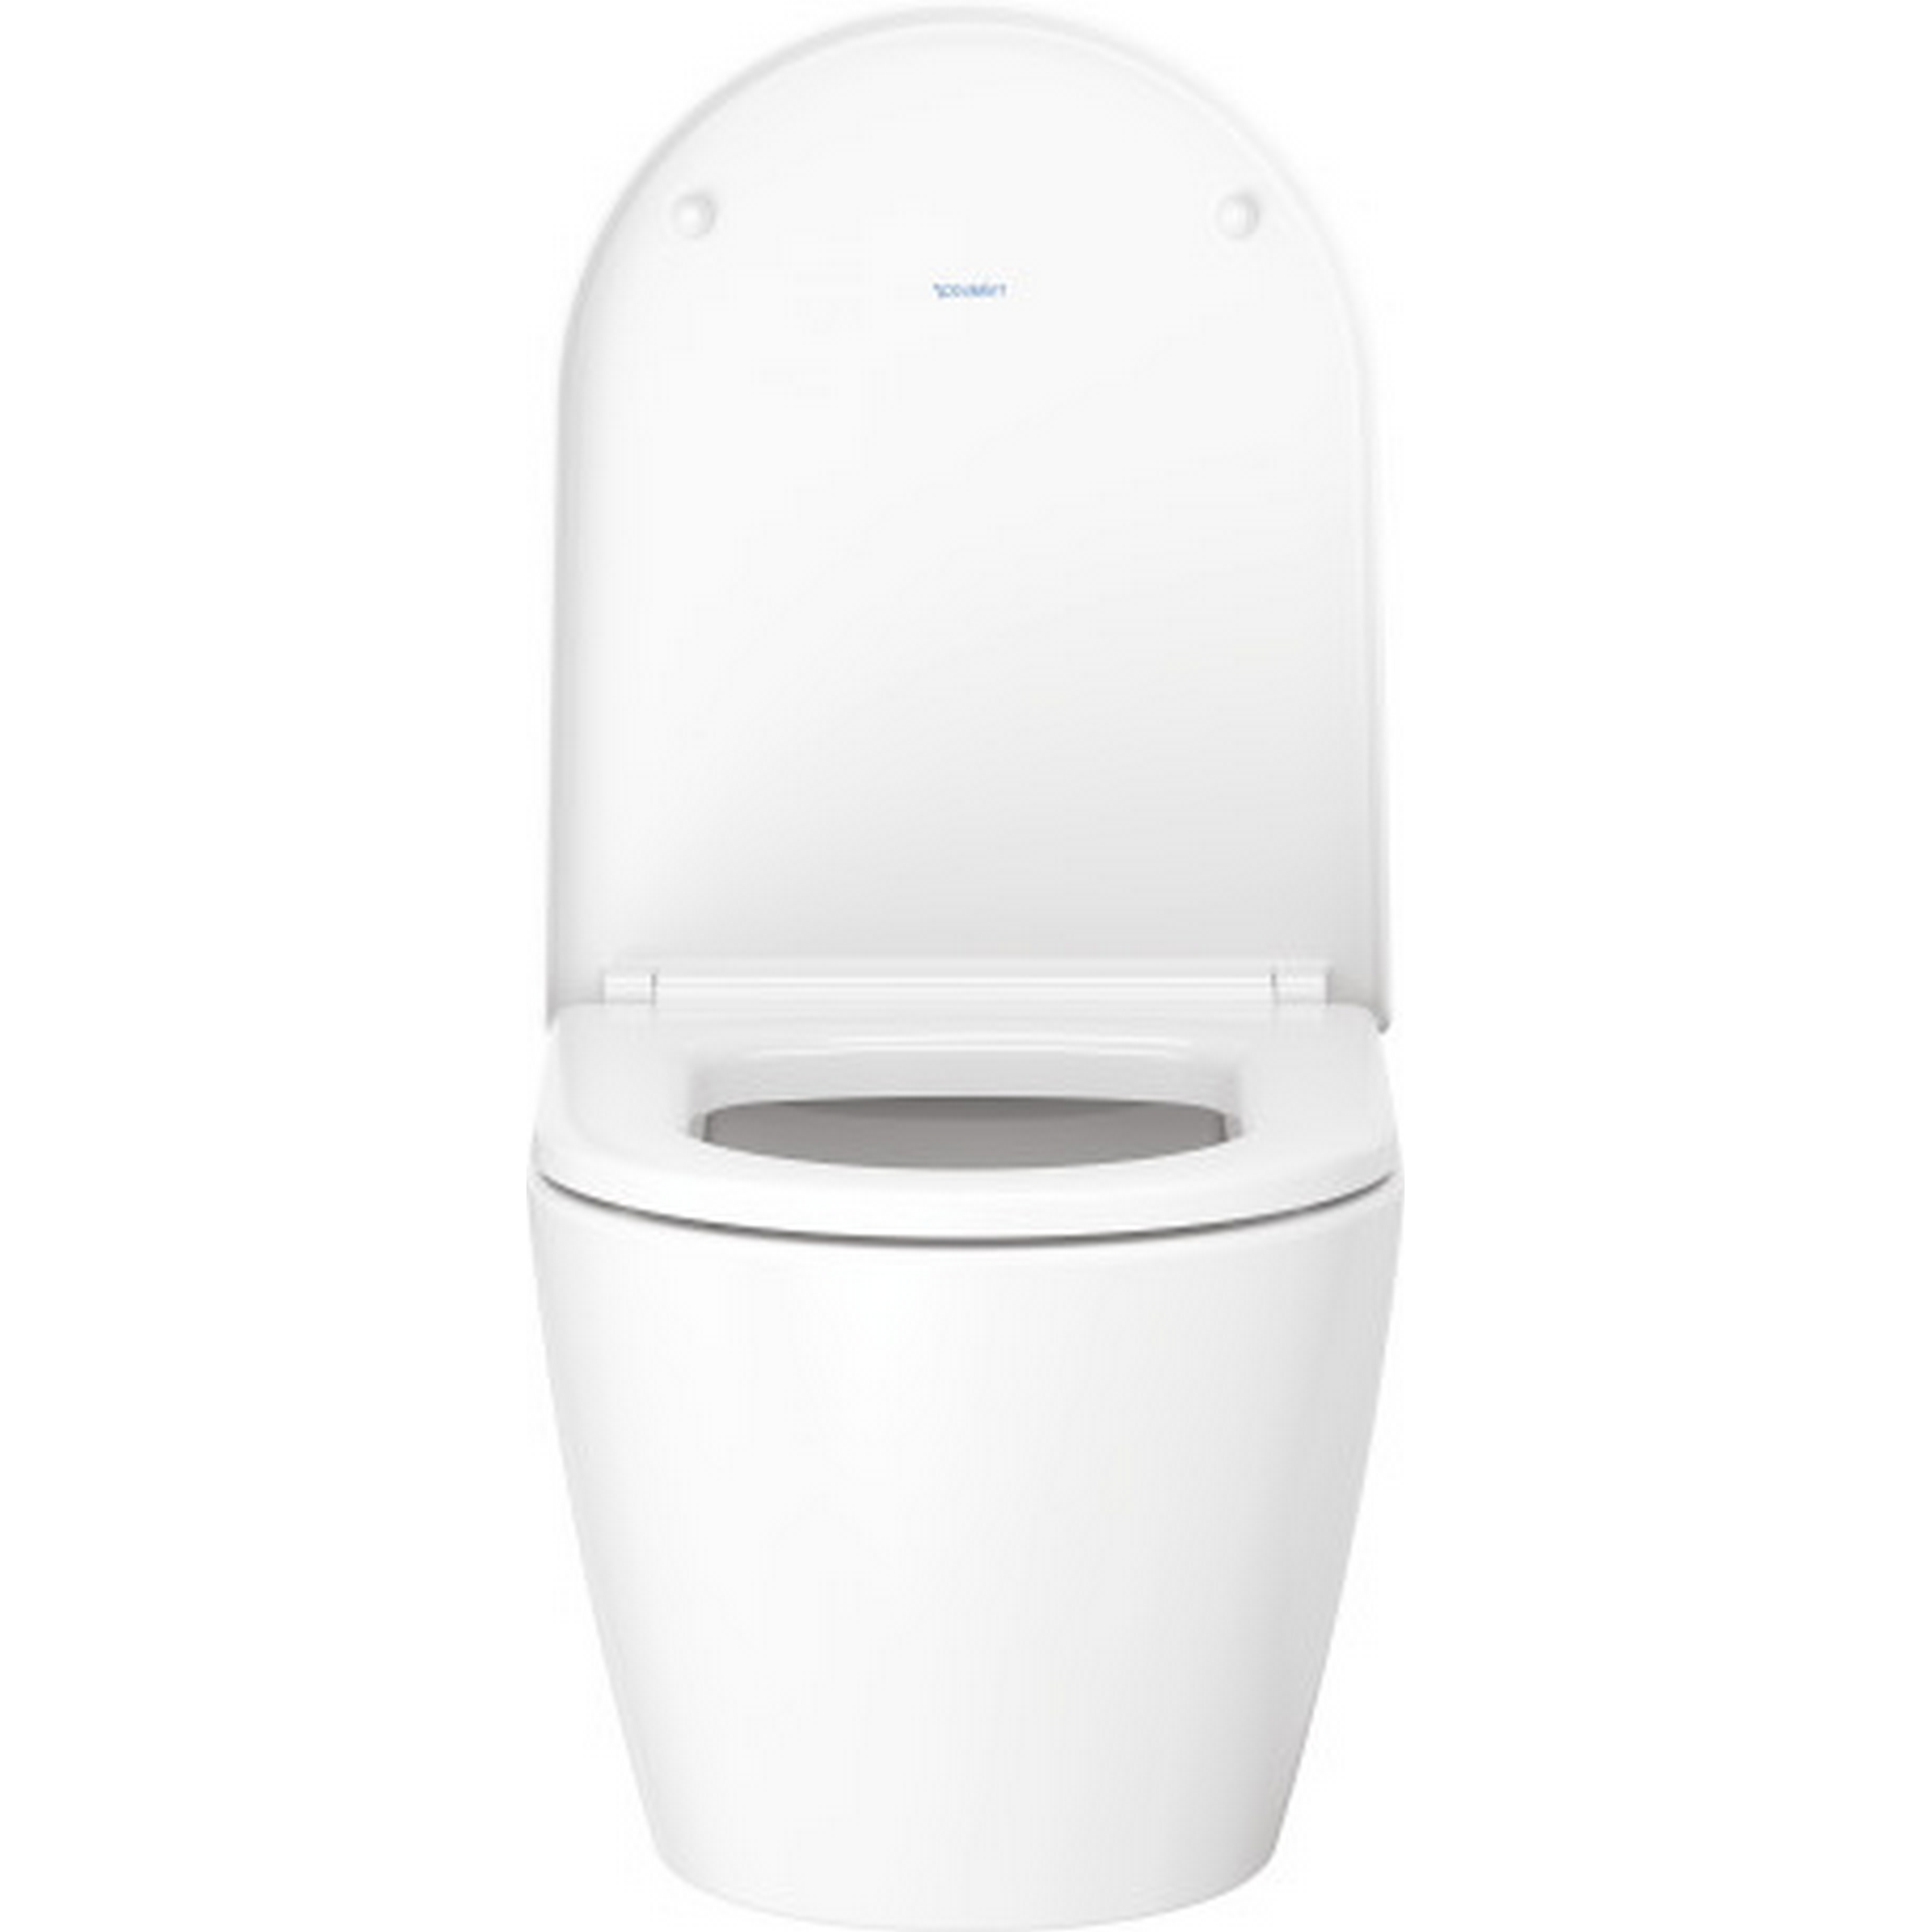 Wand-WC-Set Duravit 'ME by Starck' inkl. WC-Sitz + product picture